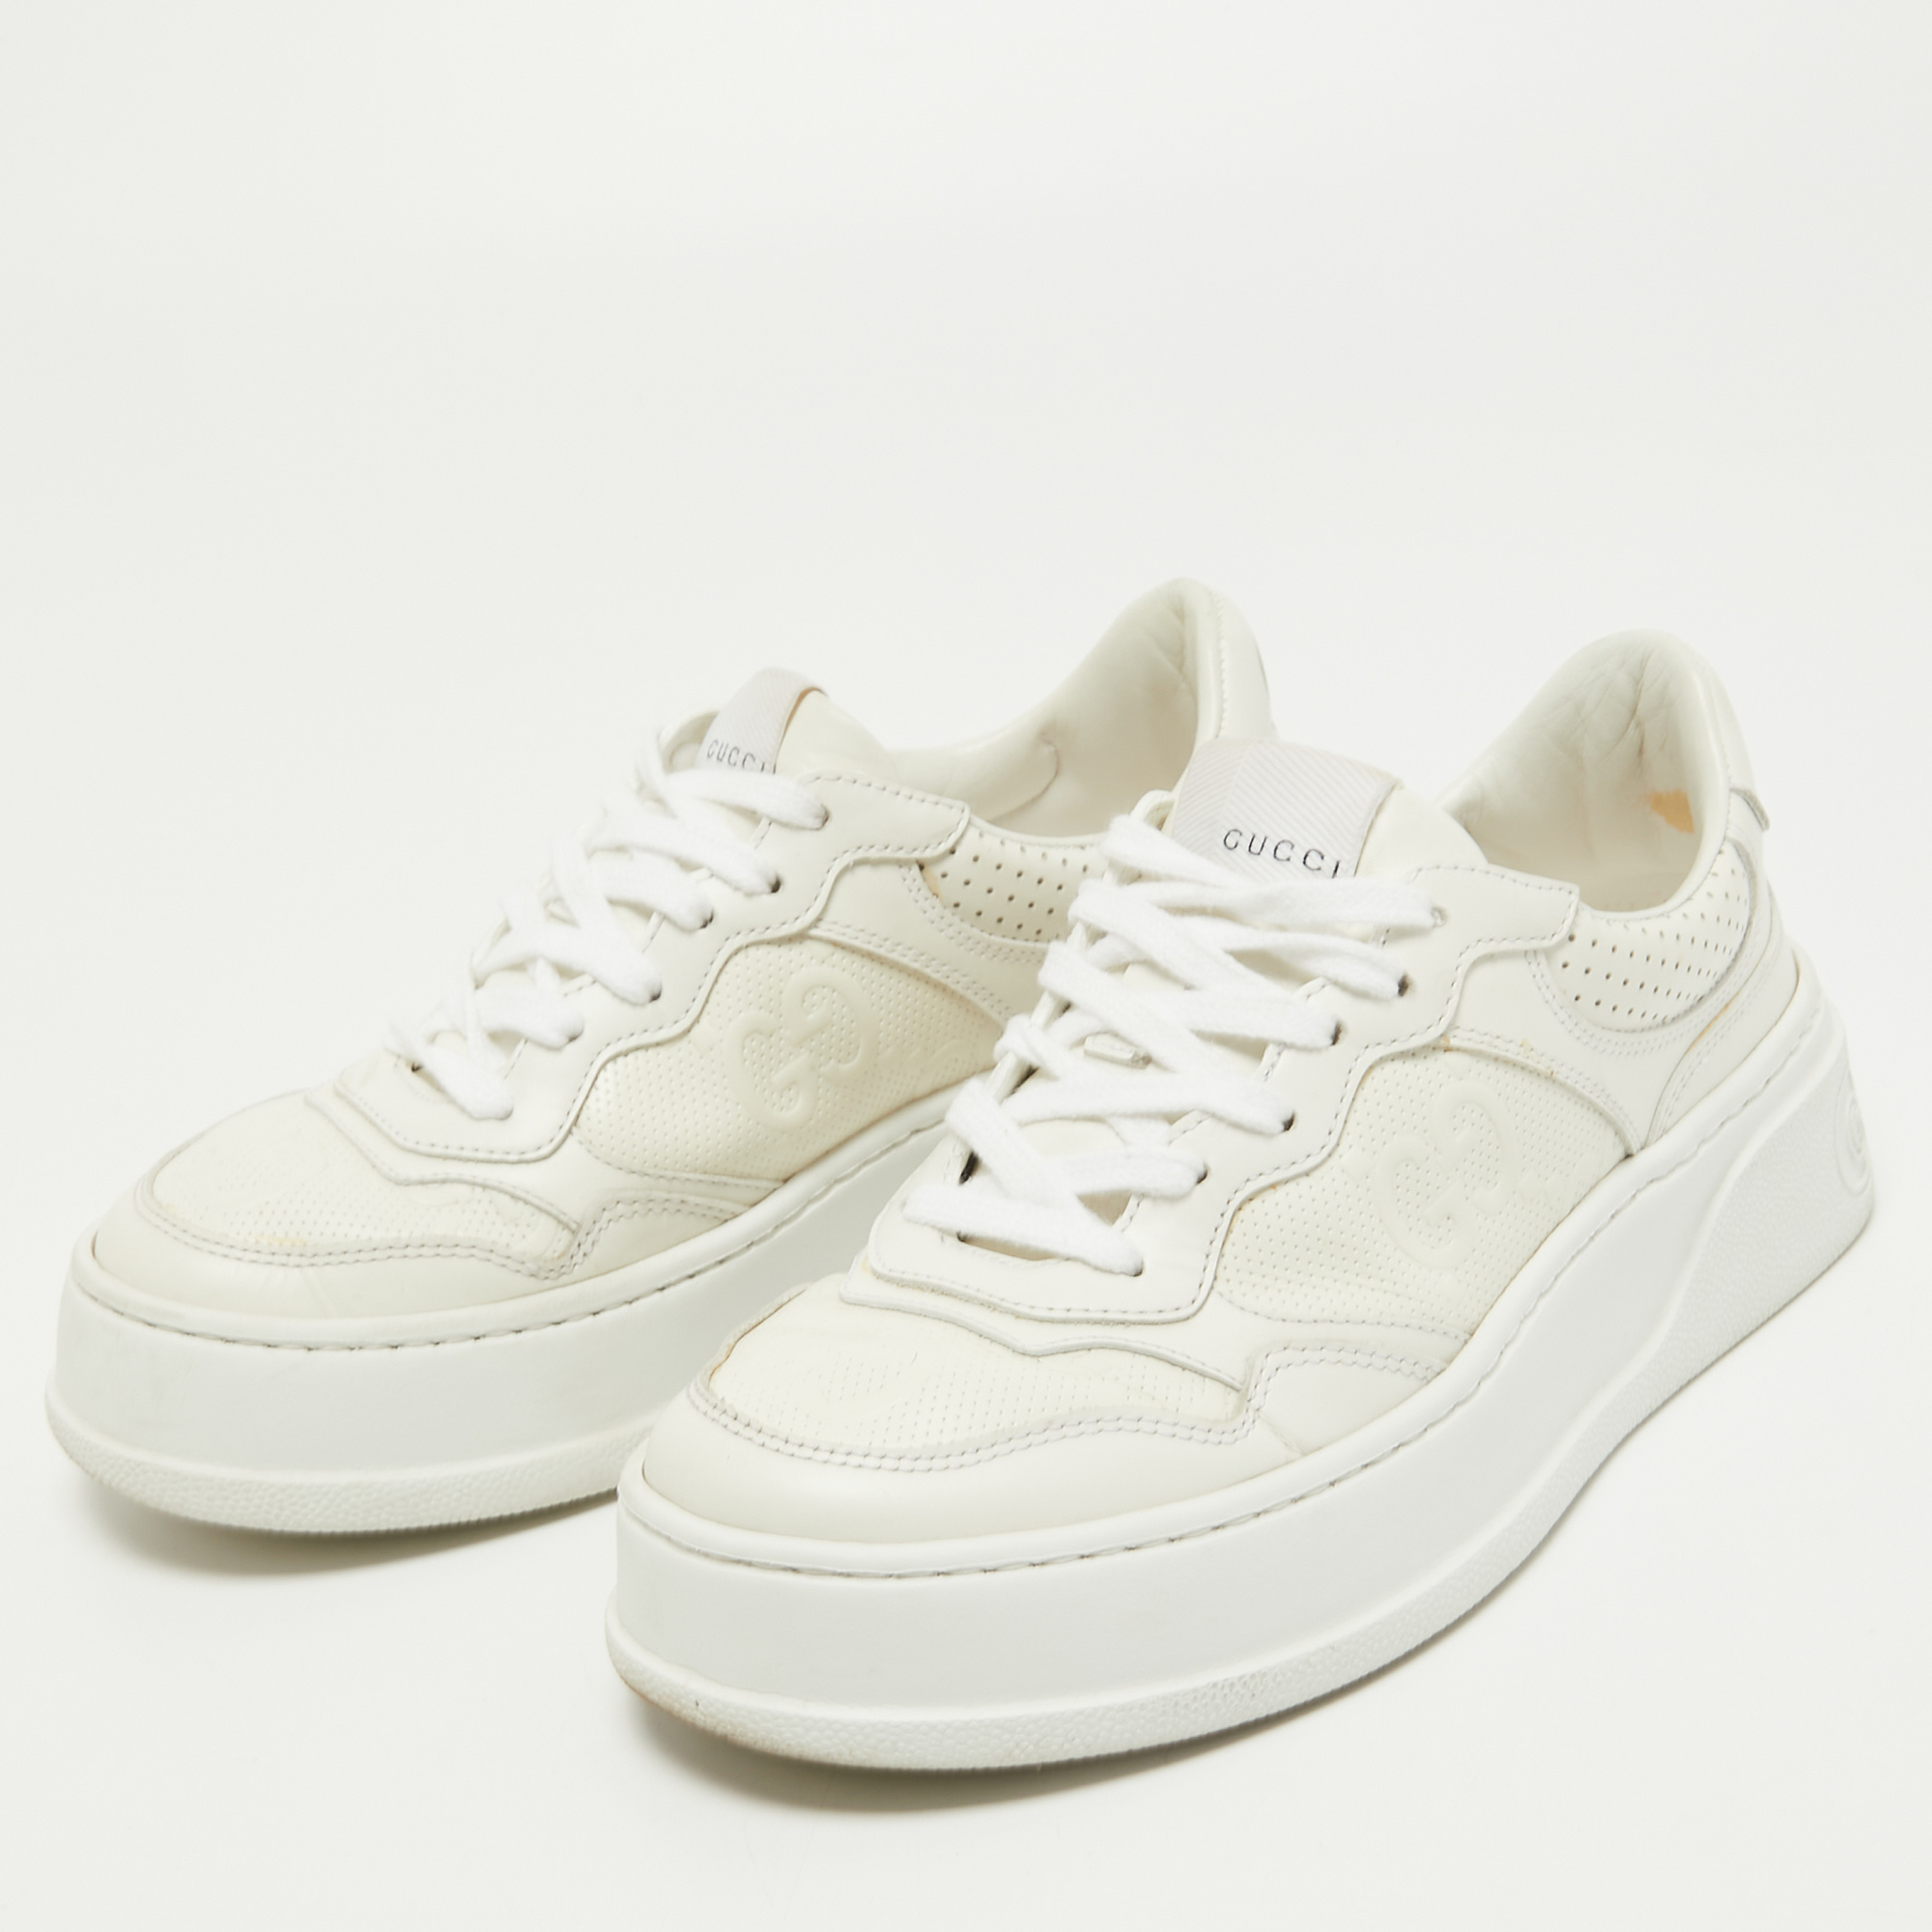 

Gucci White Leather GG Embossed Perforated Leather Trainers Sneakers Size